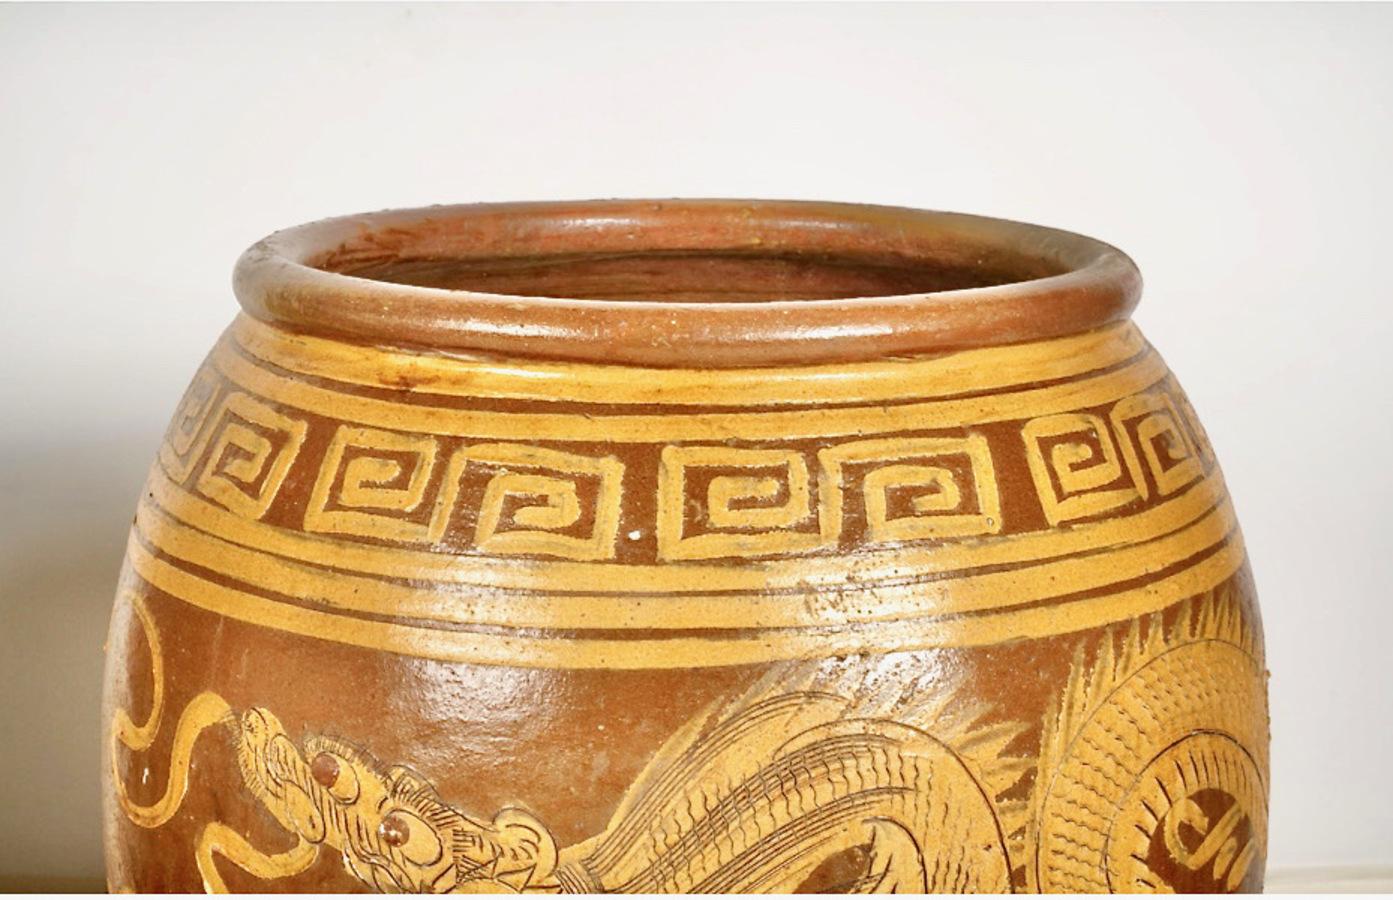 This is a great pair of large late 19th/early 20th century Martaban storage jars. The jars are decorated with flaming dragons with Greek Key borders. Both of these jars are in very good condition with anticipated patination, but undamaged. Martaban